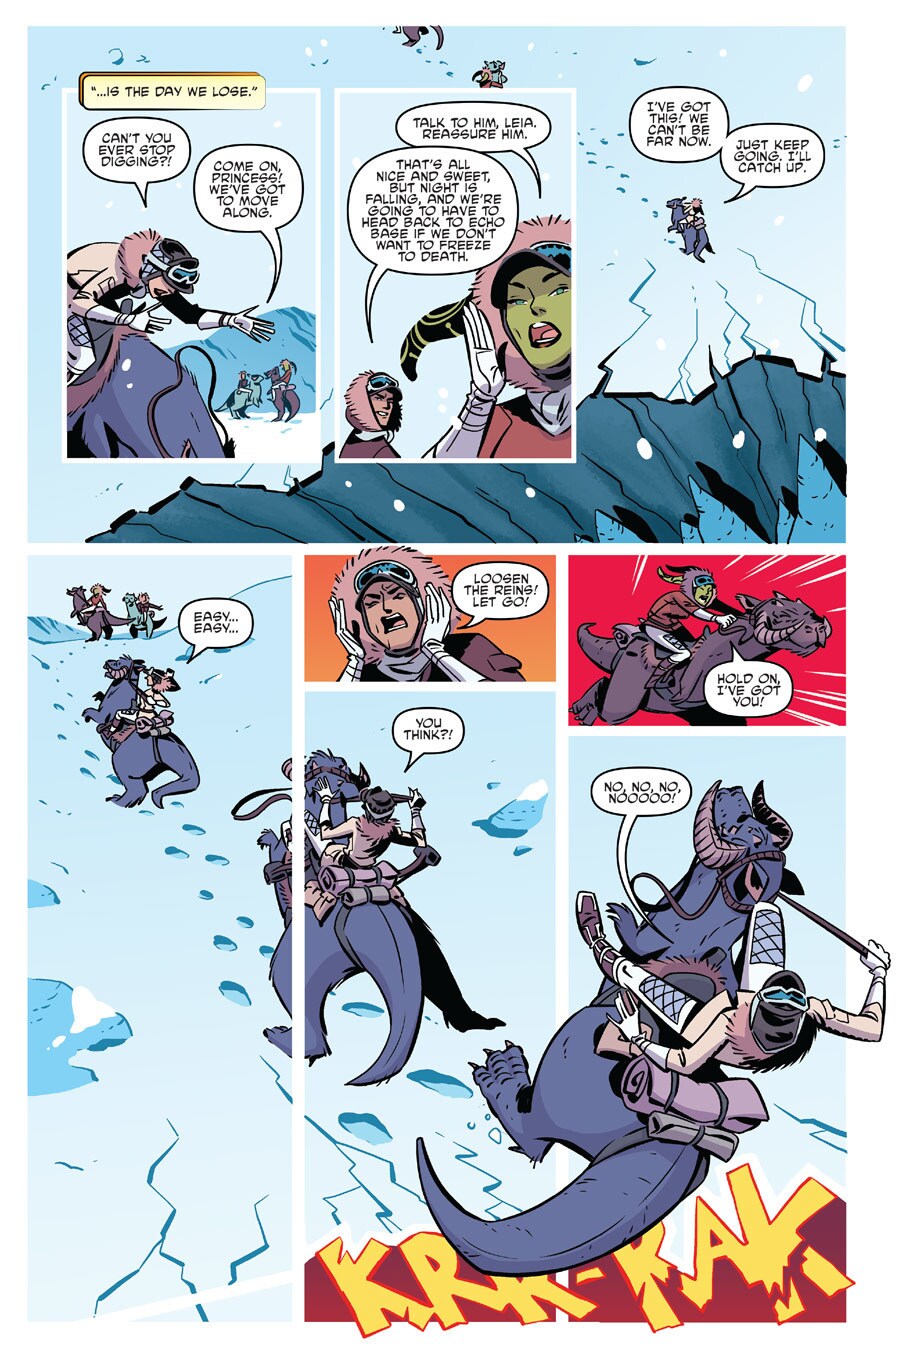 In panels from the comic book Star Wars Forces of Destiny: Leia, Hera tries to help Leia control the tauntaun she is riding.